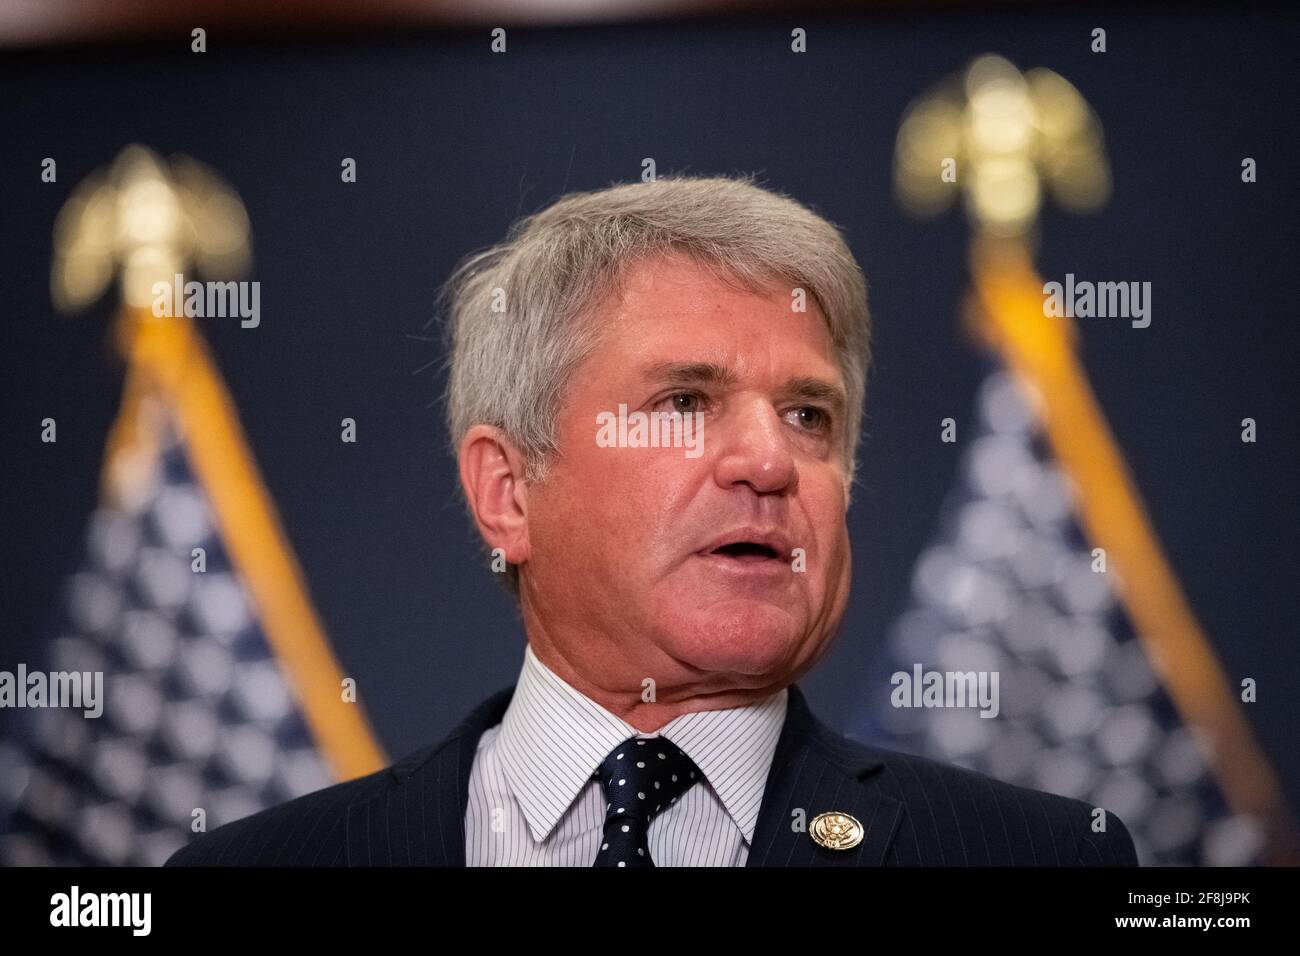 Washington, USA. 14th Apr, 2021. Representative Michael McCaul (R-TX) during a House Republican Leadership press conference, at the U.S. Capitol in Washington, DC, on Wednesday, April 14, 2021. Congressional pressure is mounting in Congress on President Biden Administration's immigration policies as negotiations continue over additional economic relief measures. (Graeme Sloan/Sipa USA) Credit: Sipa USA/Alamy Live News Stock Photo